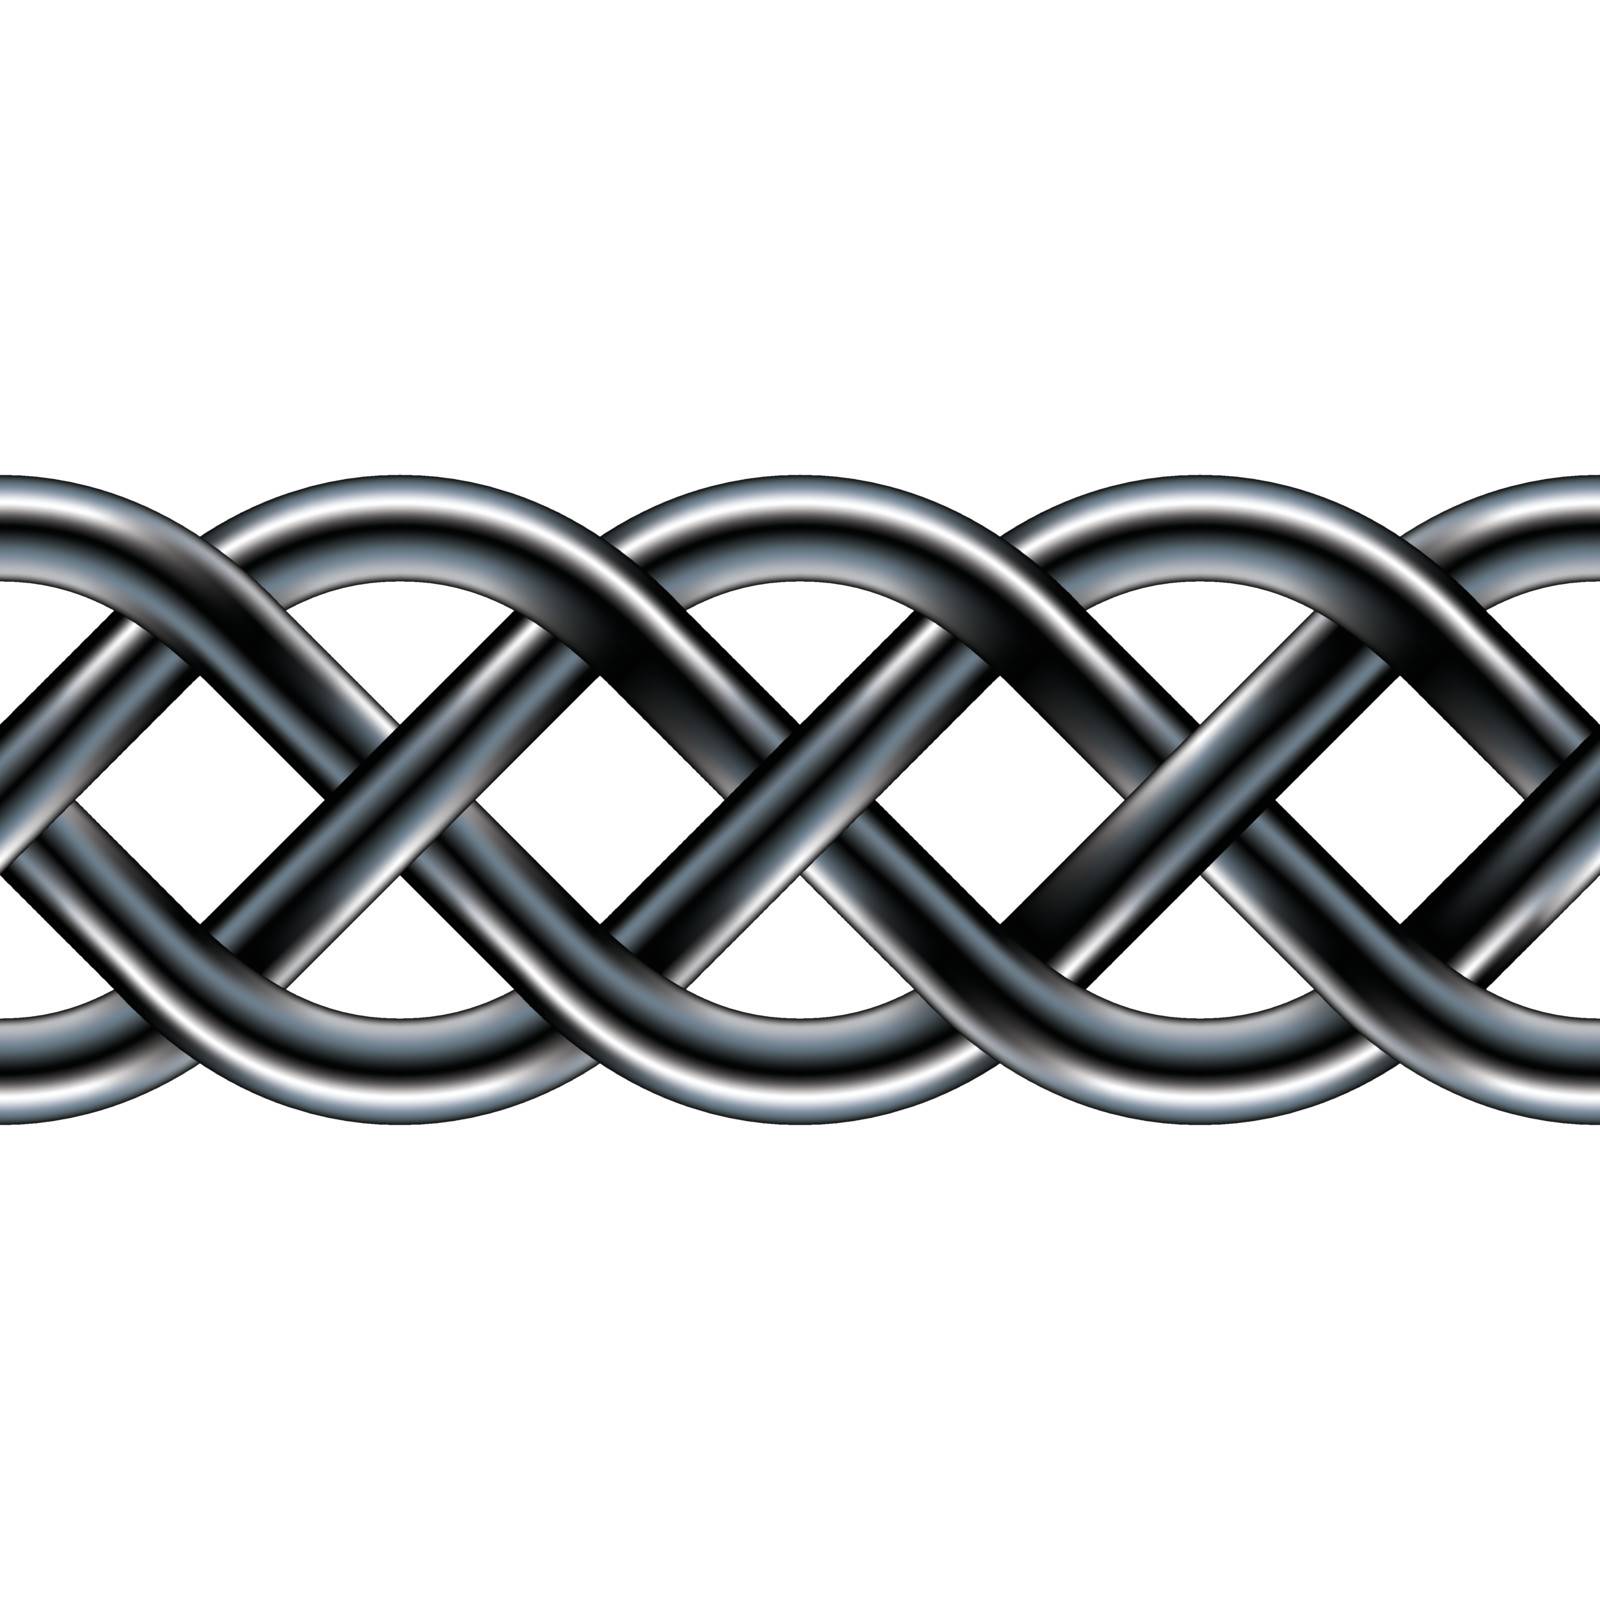 Seamless celtic rope border vector by lhfgraphics